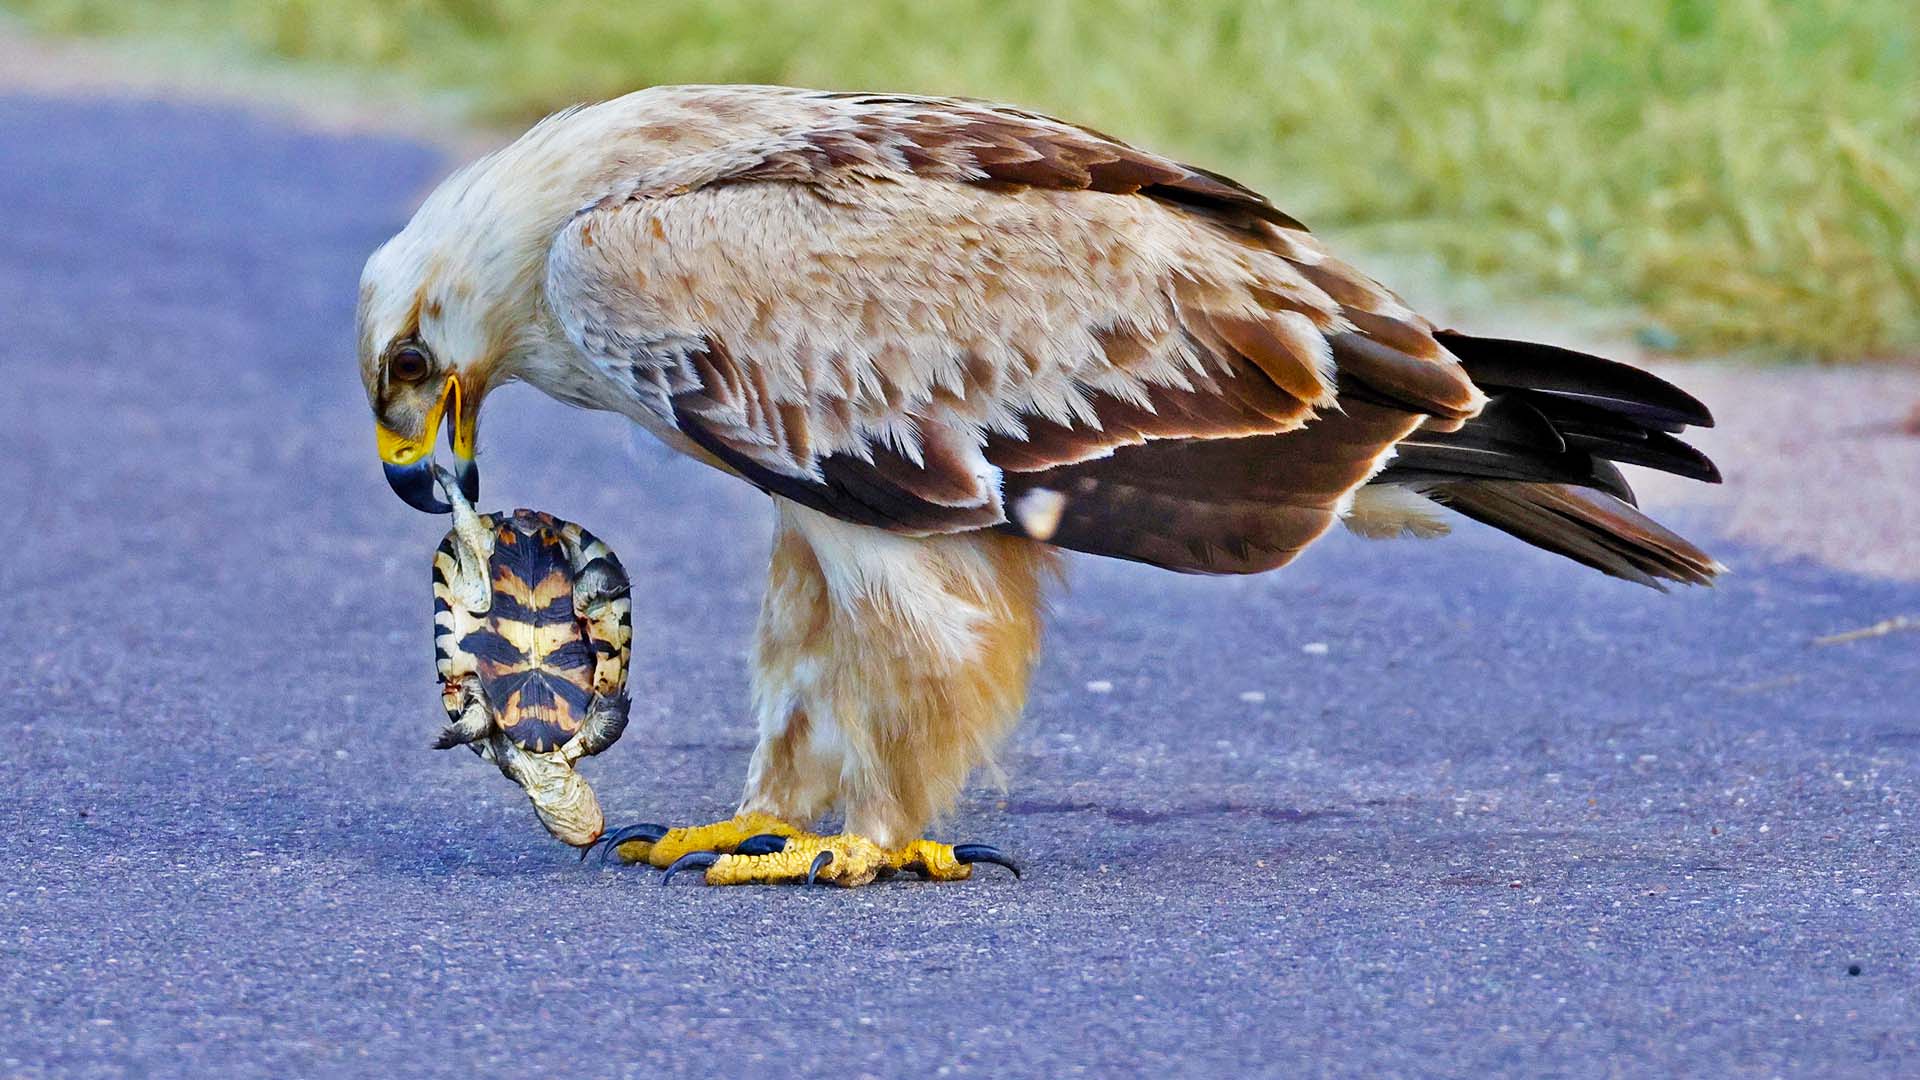 Eagle Rips Tortoise Apart in Road